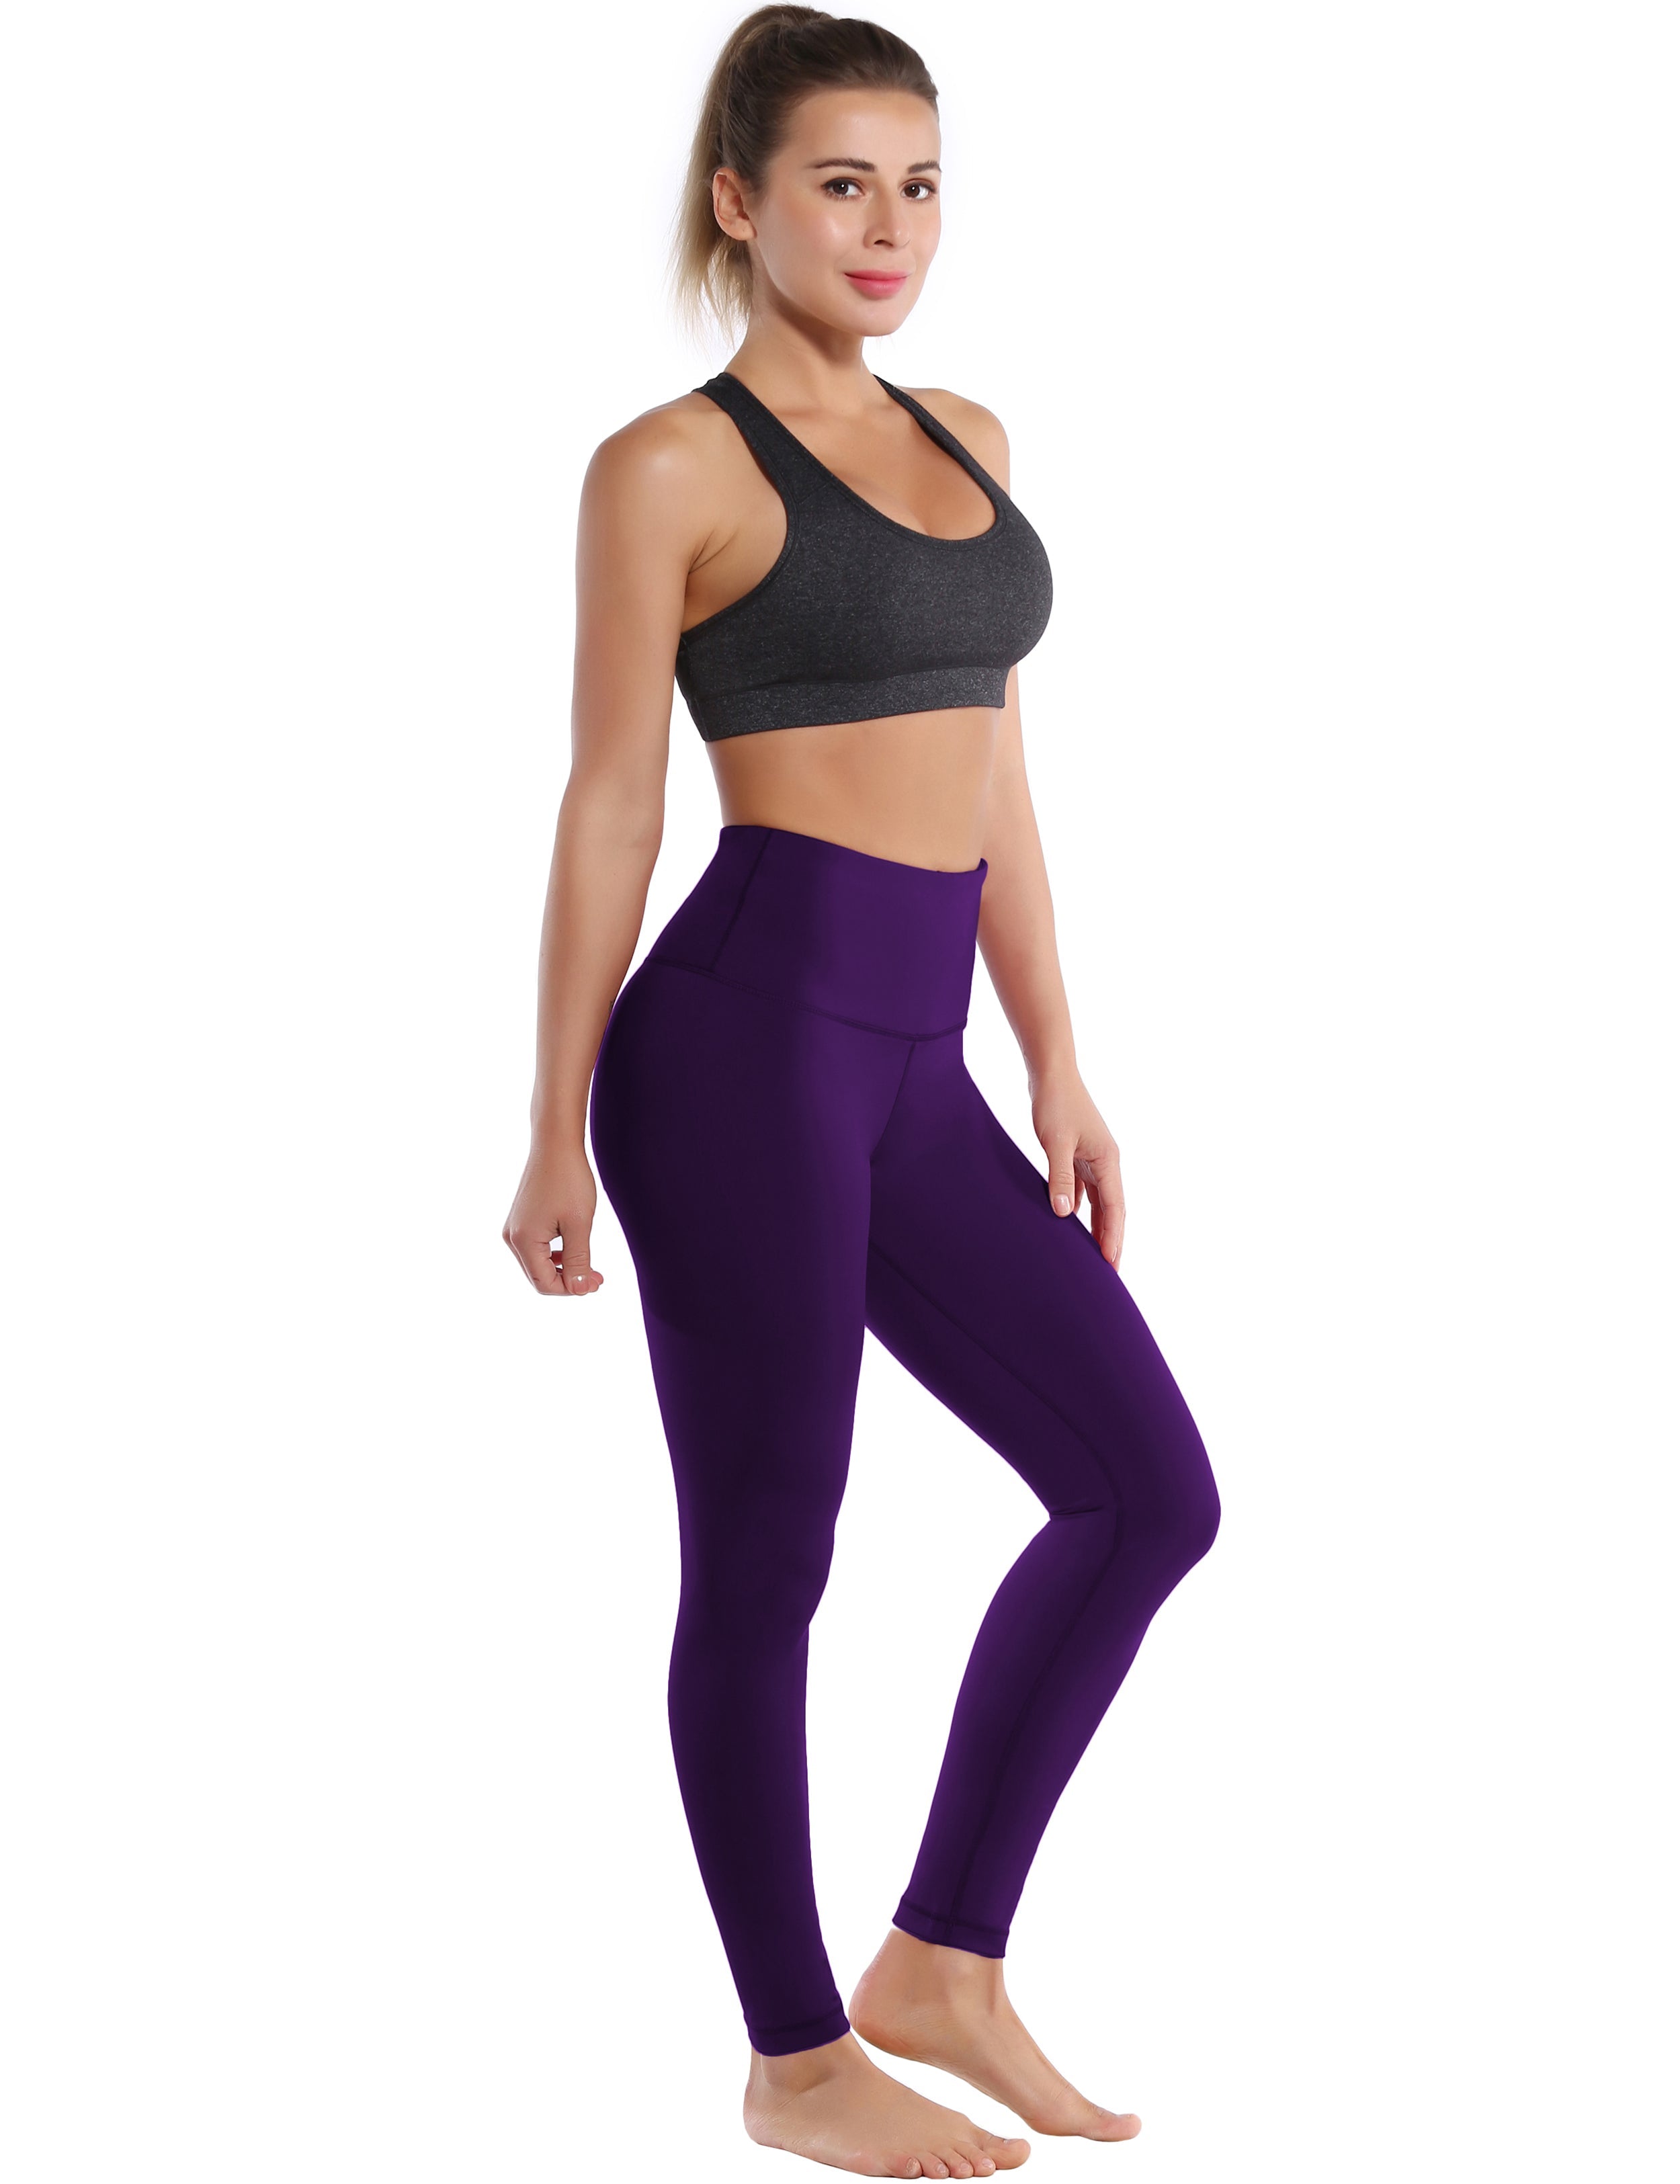 High Waist Pilates Pants eggplantpurple 75%Nylon/25%Spandex Fabric doesn't attract lint easily 4-way stretch No see-through Moisture-wicking Tummy control Inner pocket Four lengths